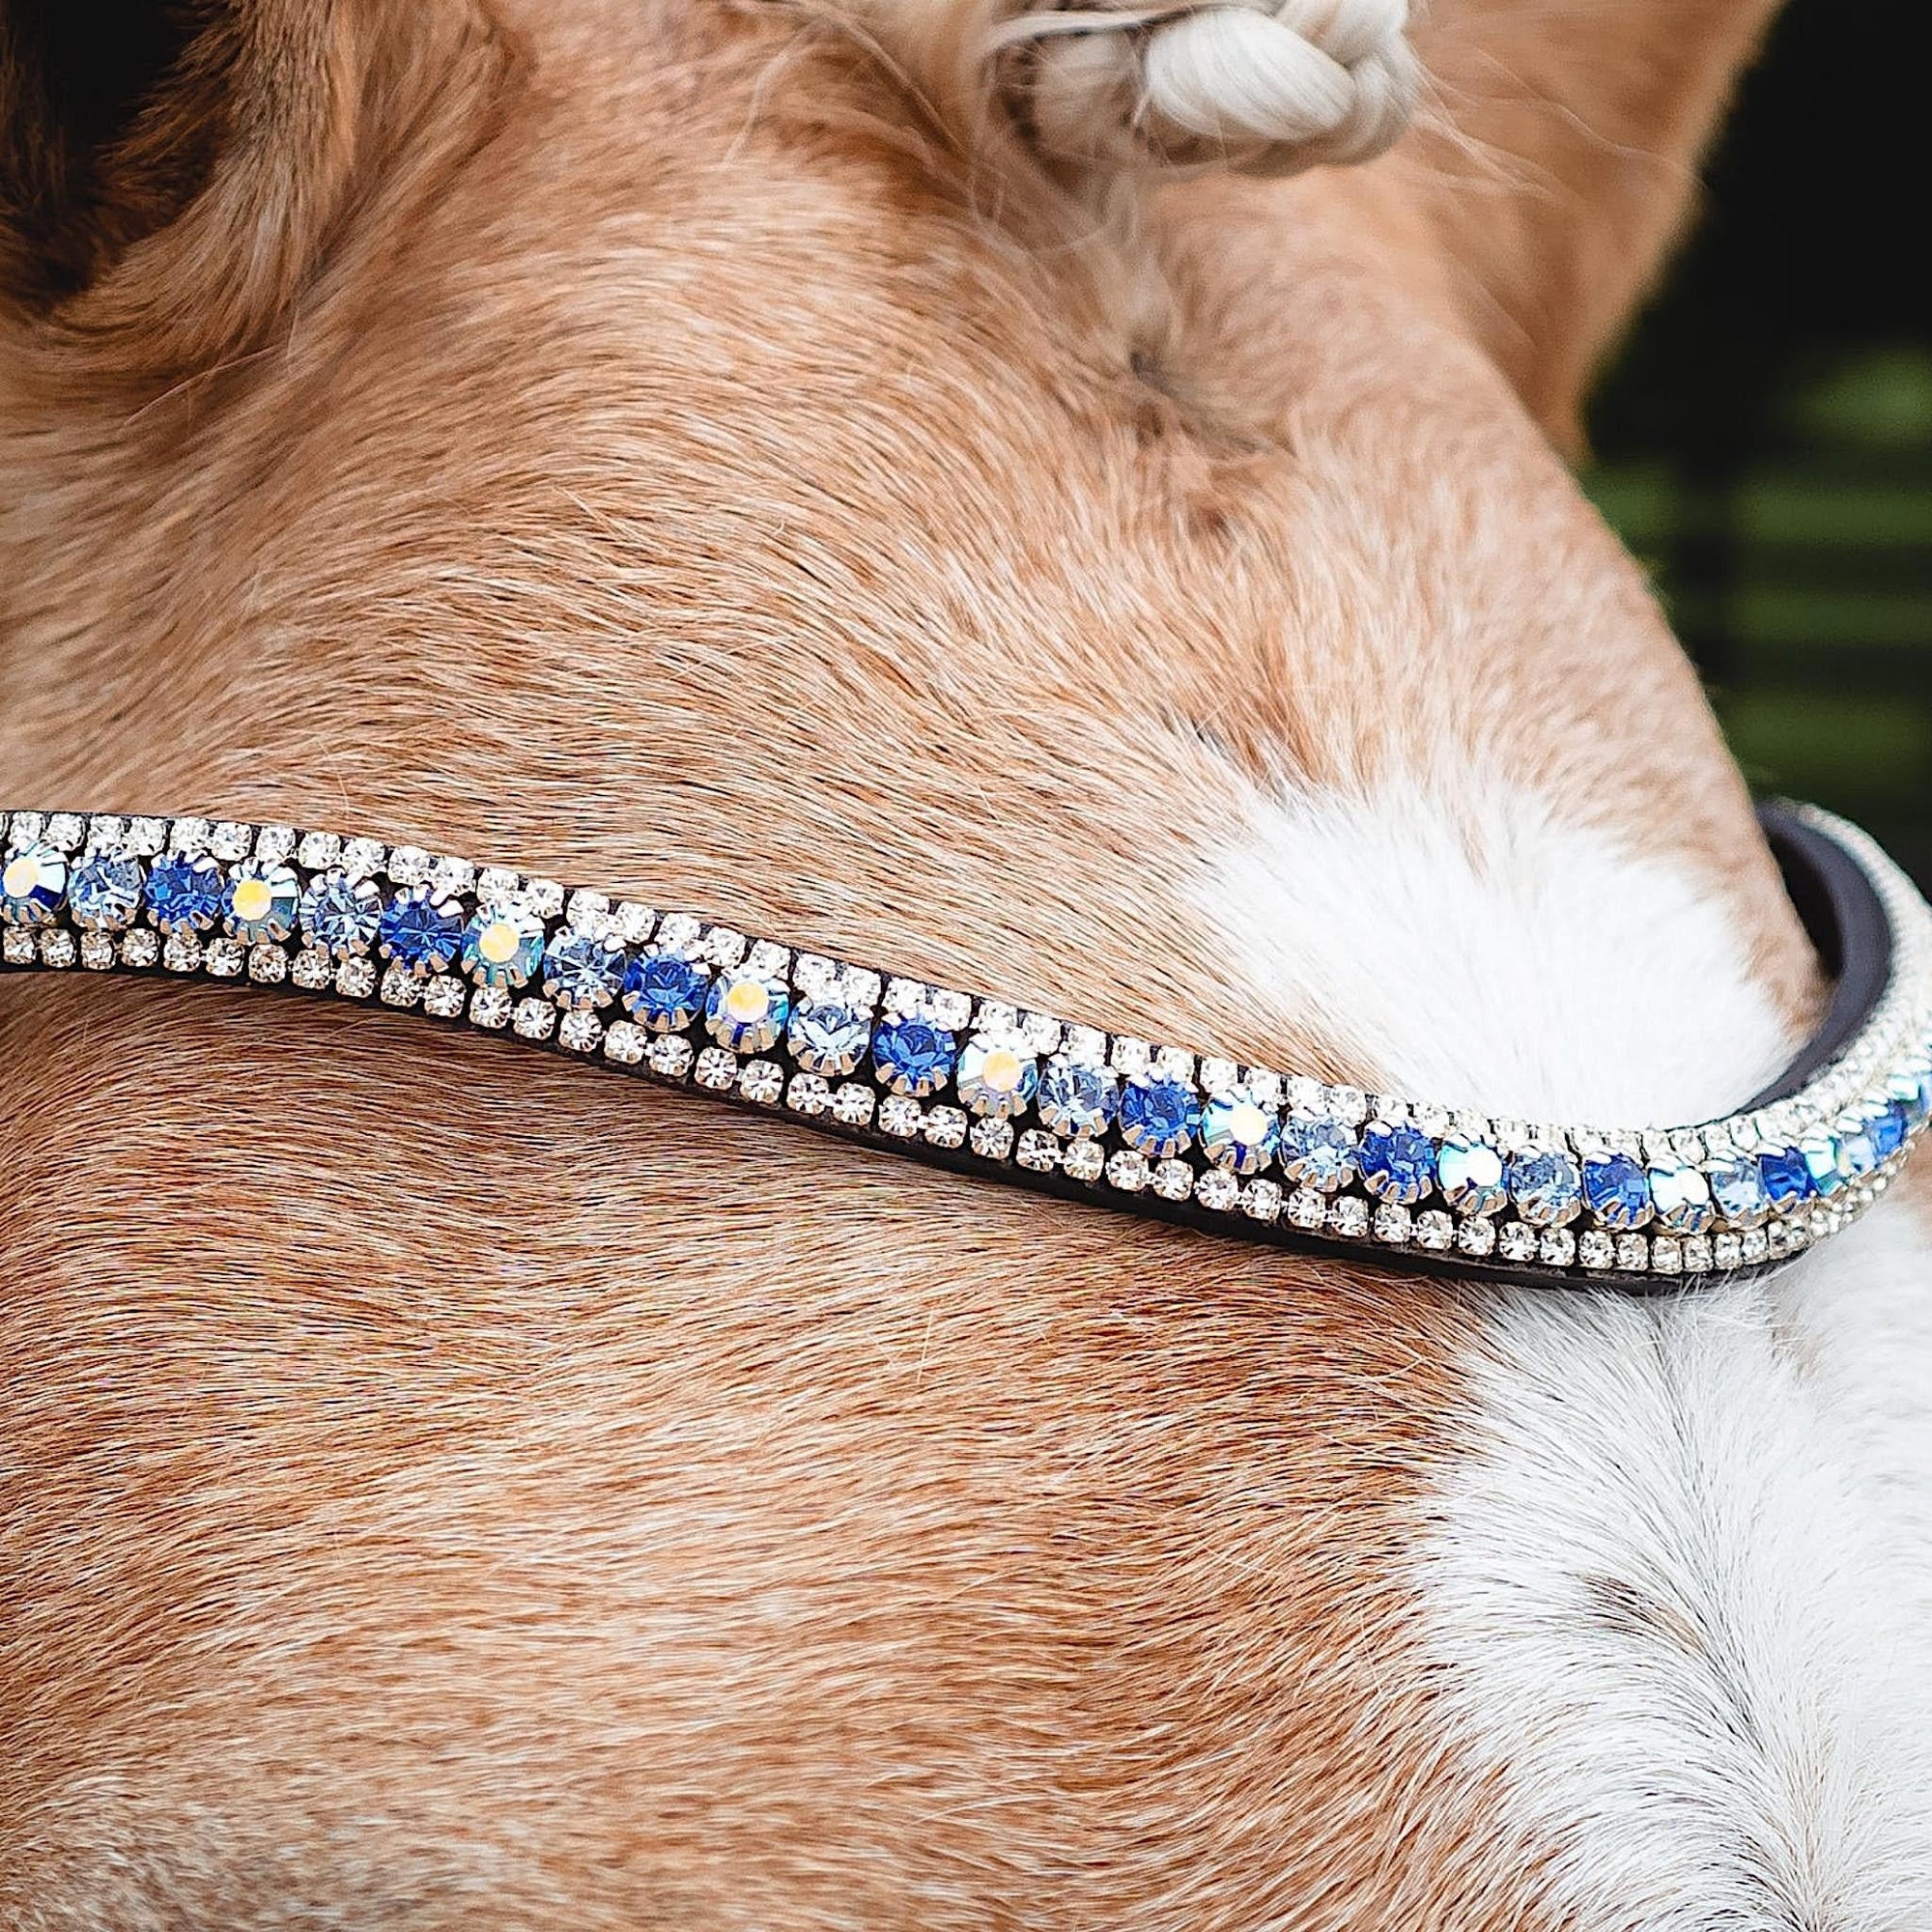 Silver and blue crystals encrusted onto a browband with black leather padding.